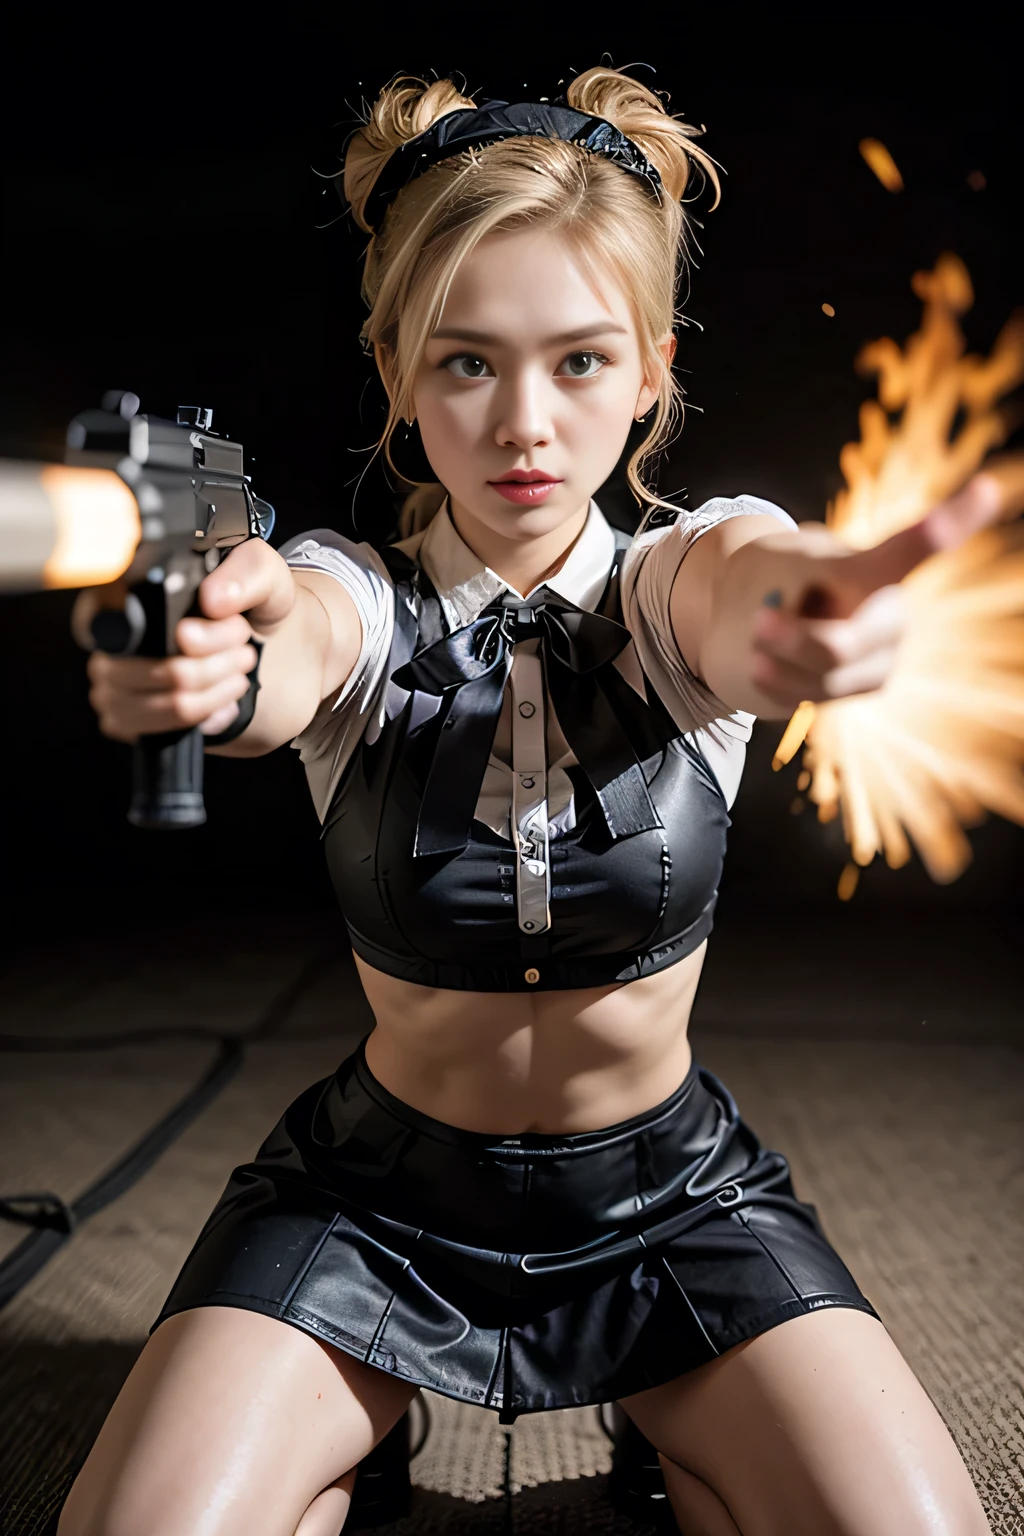 20 year old female maid, Wearing traditional maid uniform, Blonde Hair, , Point a gun at someone, Beautifully detailed face, The hairstyle is braided, Cinematic lighting effects, , Dynamic composition, Dynamic pose, Kneeling Shot, Face Shot, Anatomically correct body, Has an assault rifle, The hairstyle is a bun, Muzzle Flash, Red lipstick, Black skirt with frills, Chic pumps, They&#39;re firing., Garter belt and white stockings, Detailed depiction of a gun, Assassin, Aimed at viewers, destiny2weaponを握っている, Outdoor, World Trade Center rooftop, Anatomically correct number of hands, There&#39;s a moon in the sky, hold a gun with both hands, Anatomically correct leg shaping, Skyscraper rooftop, M4カービンHas an assault rifle, A strong wind is blowing